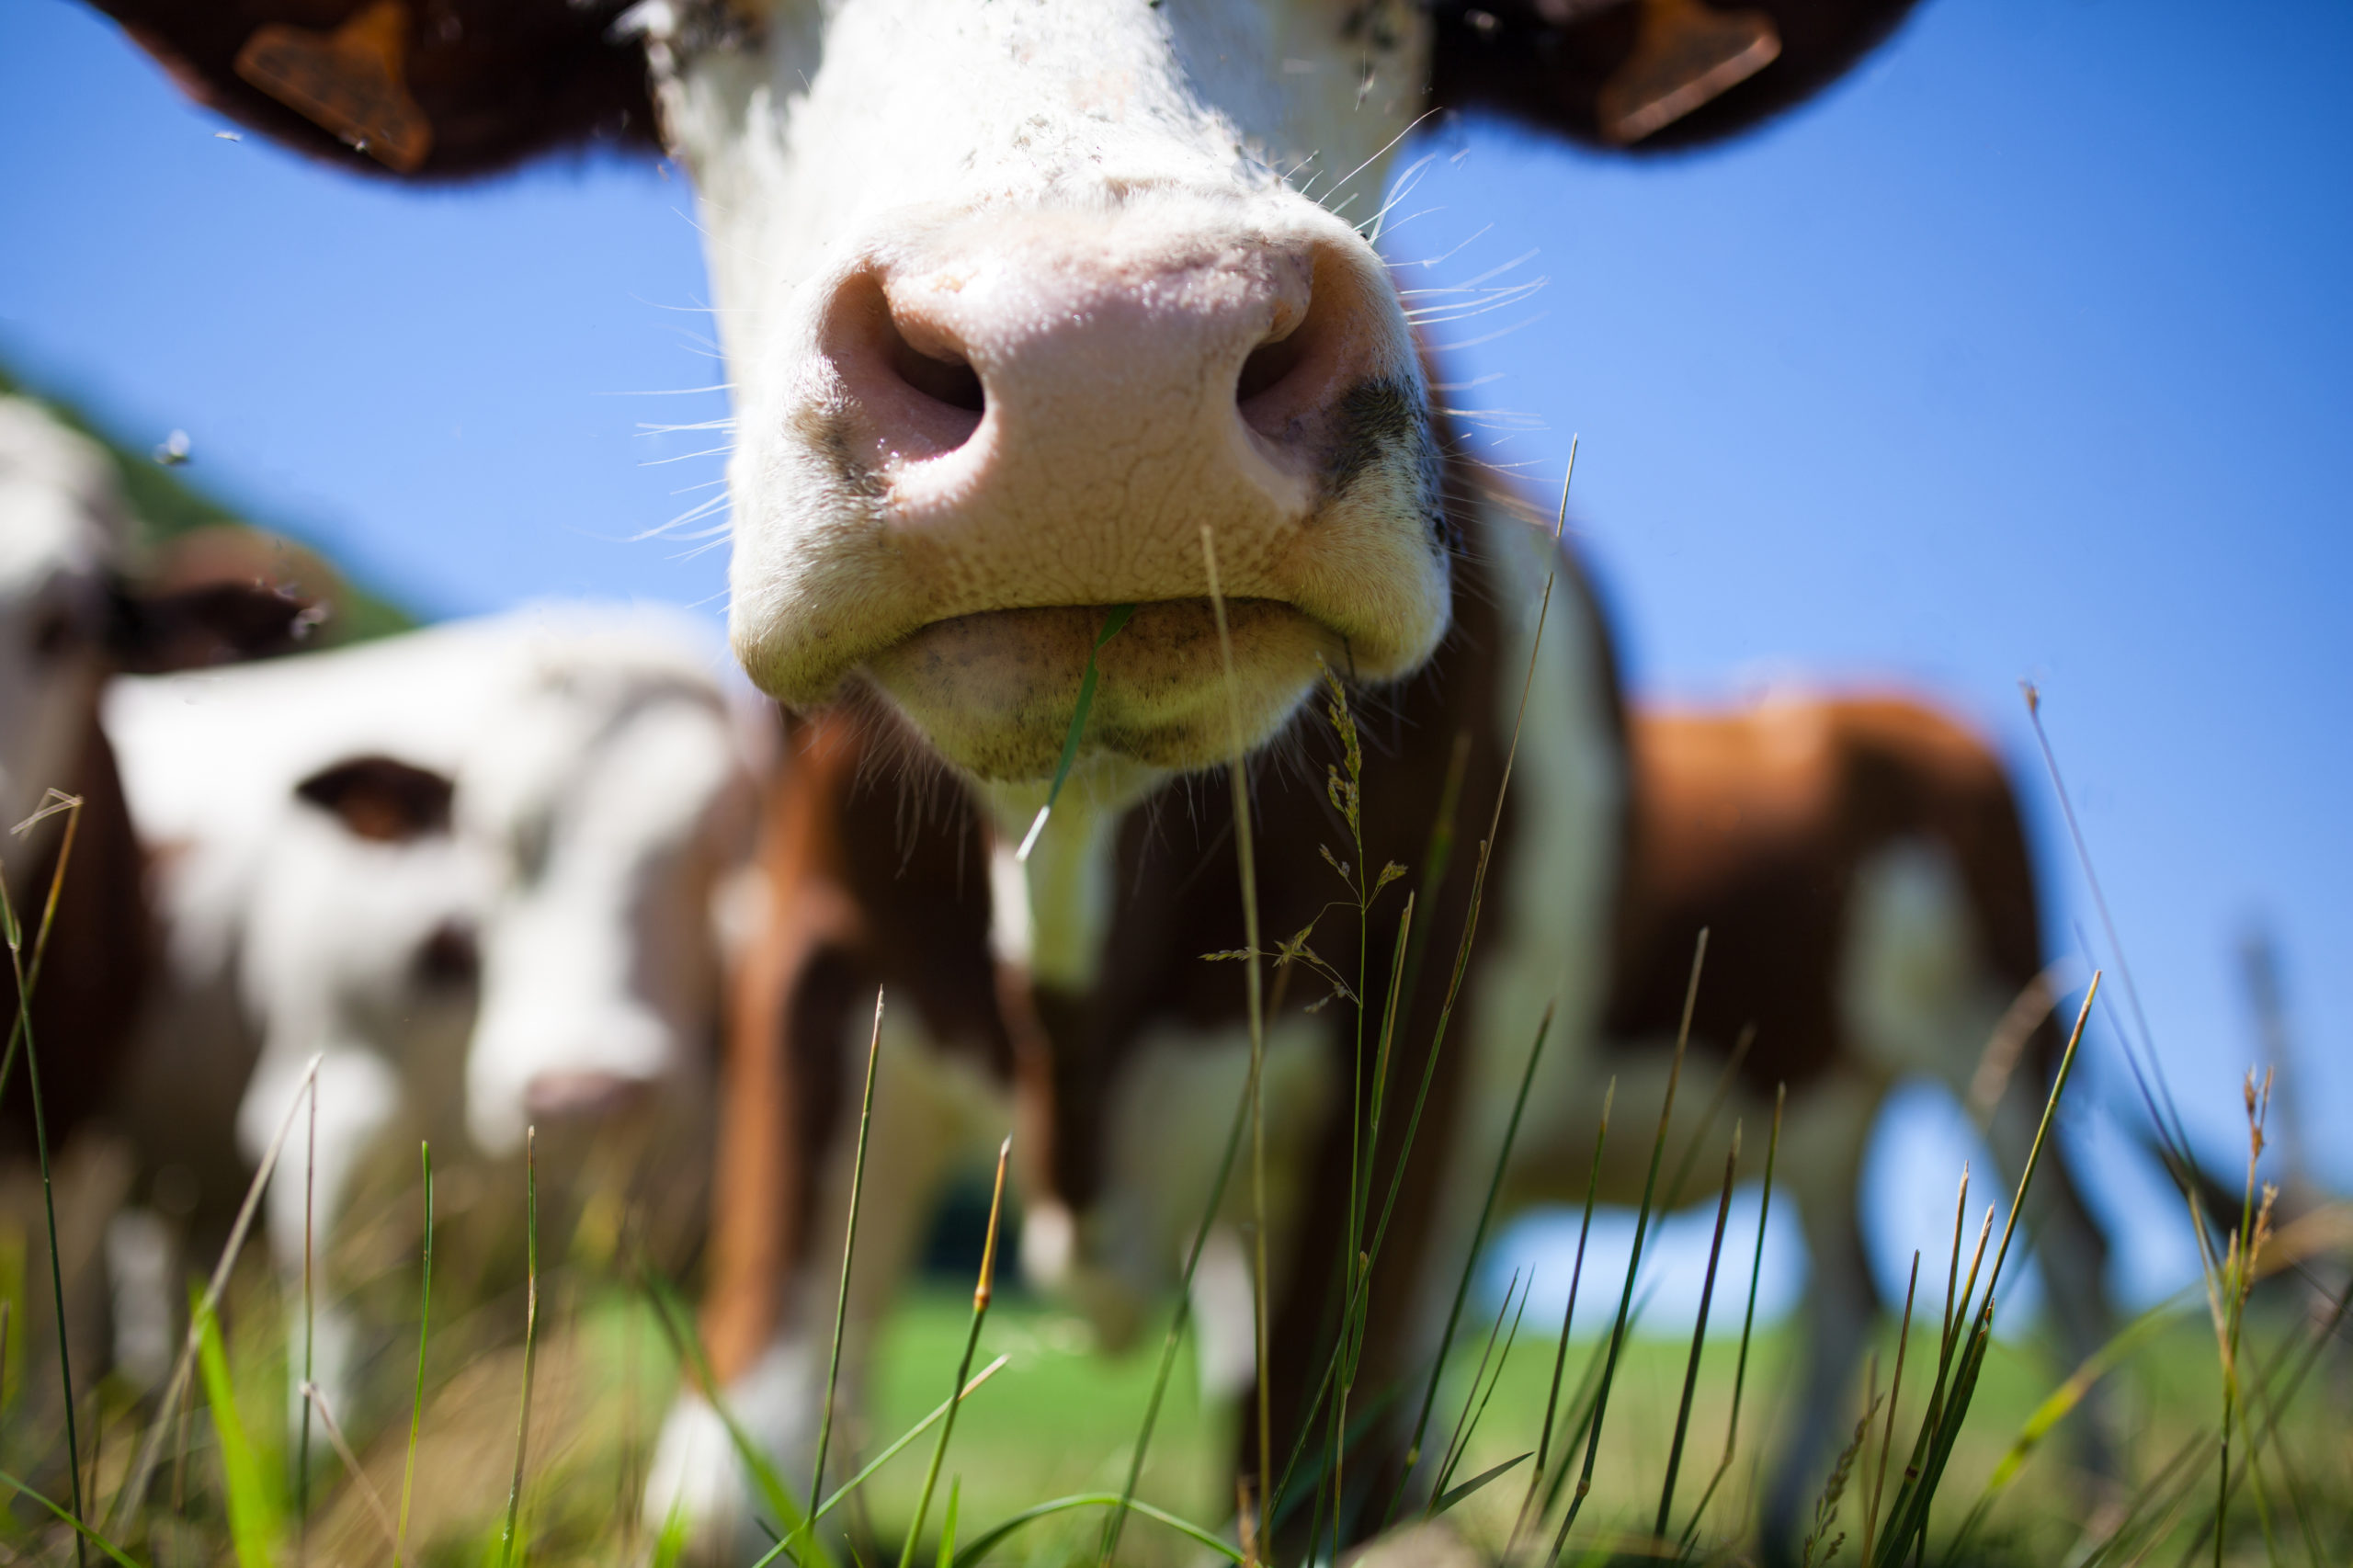 a close up image of a cow eating grass